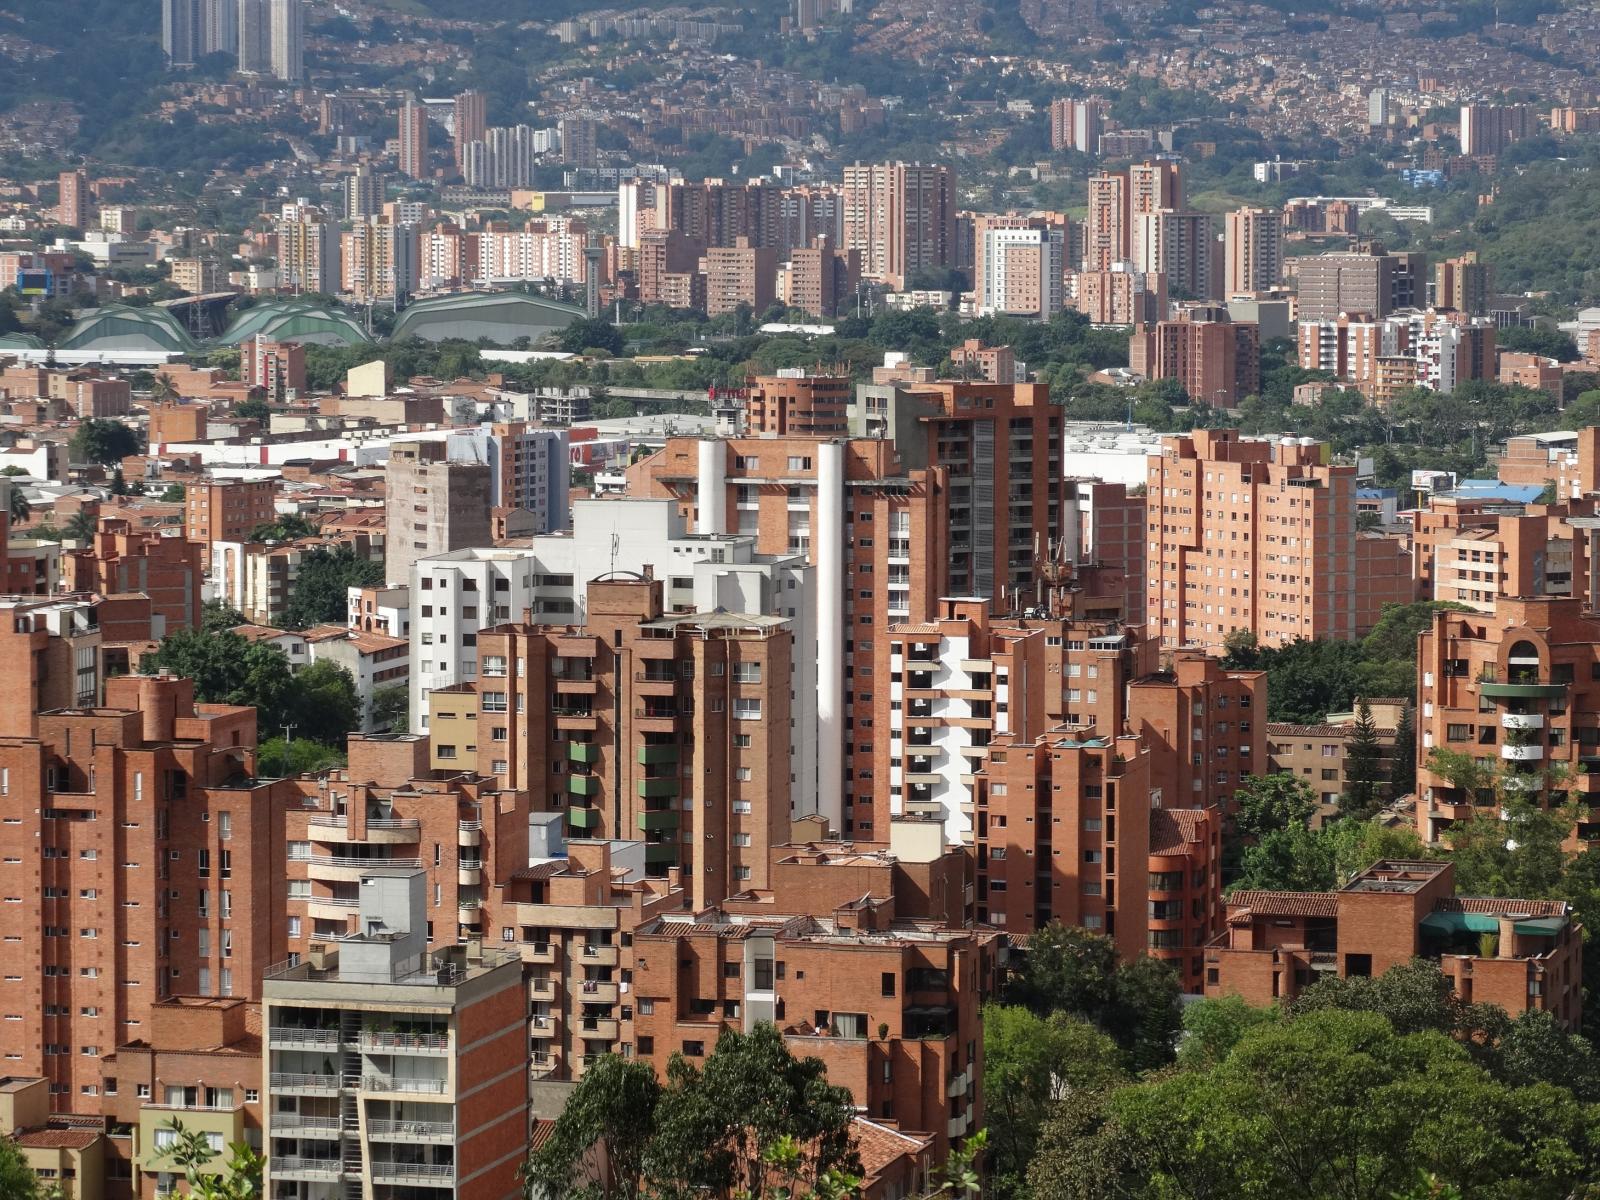 Tall Columbian buildings surrounded by greenery. 